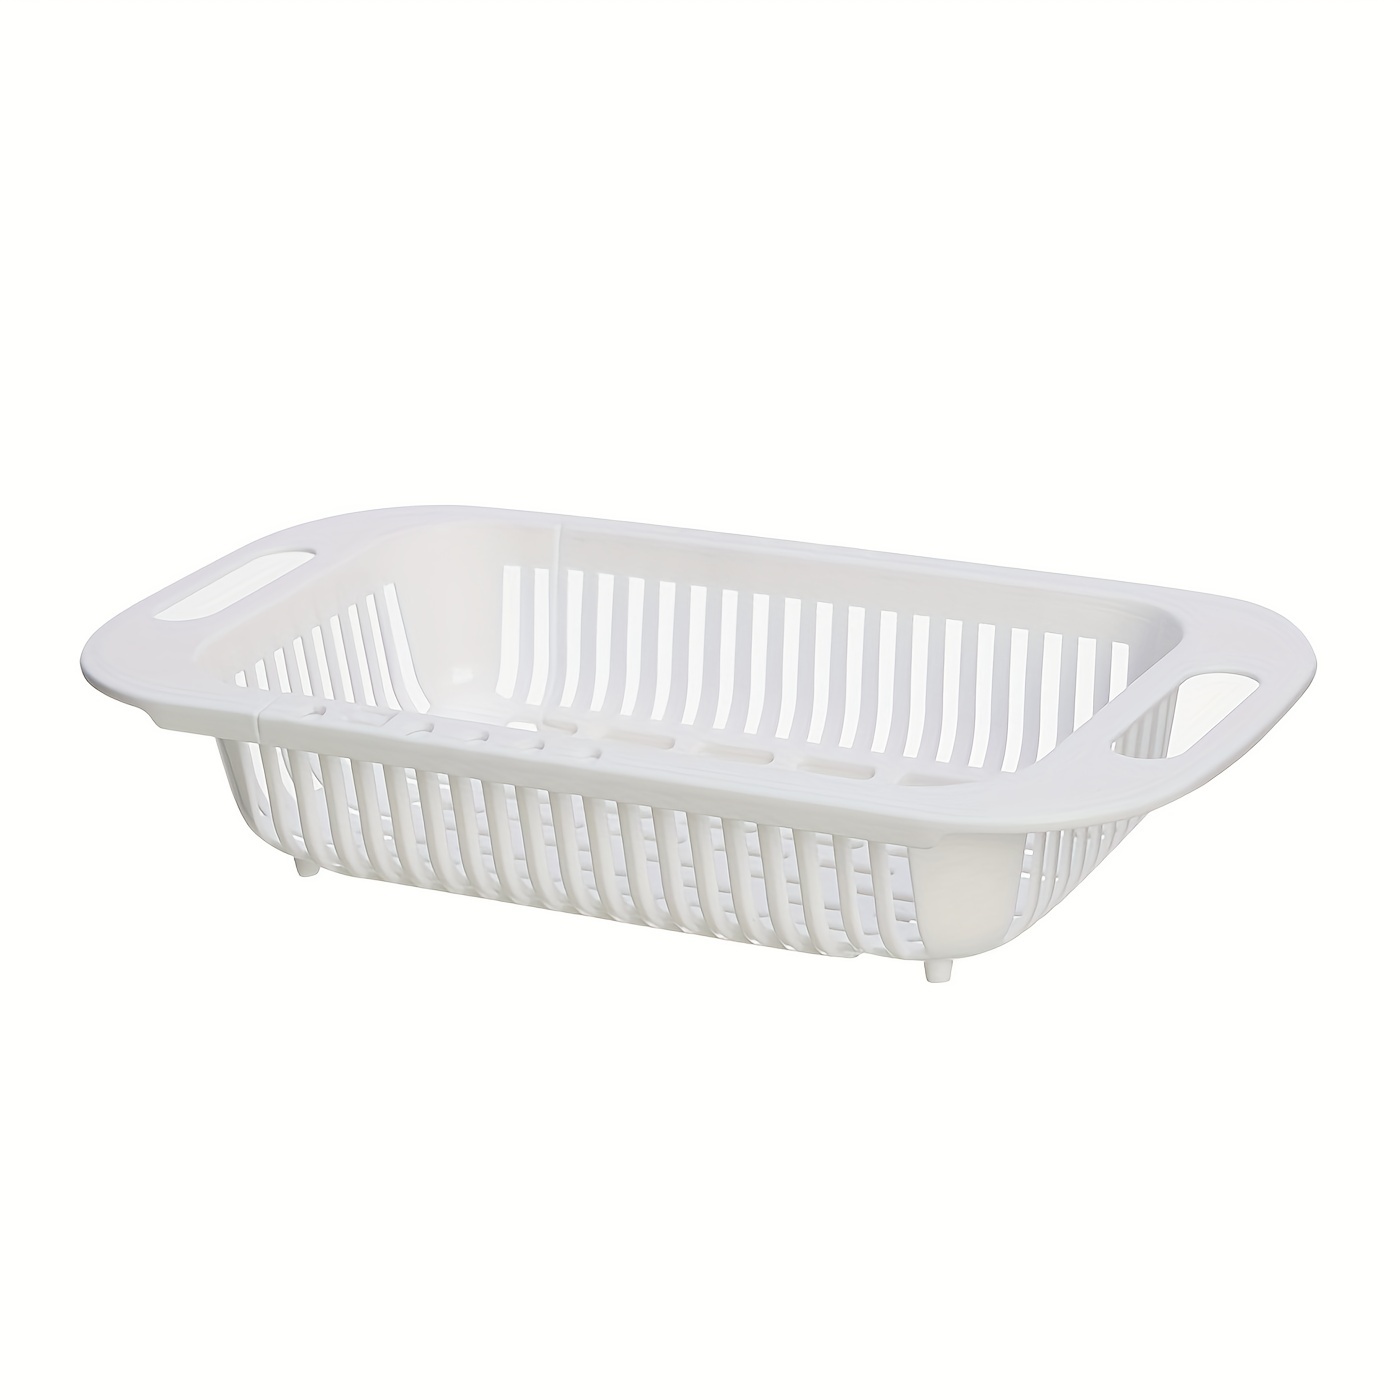 Plastic white dish dryer. Accessories for the kitchen, washing